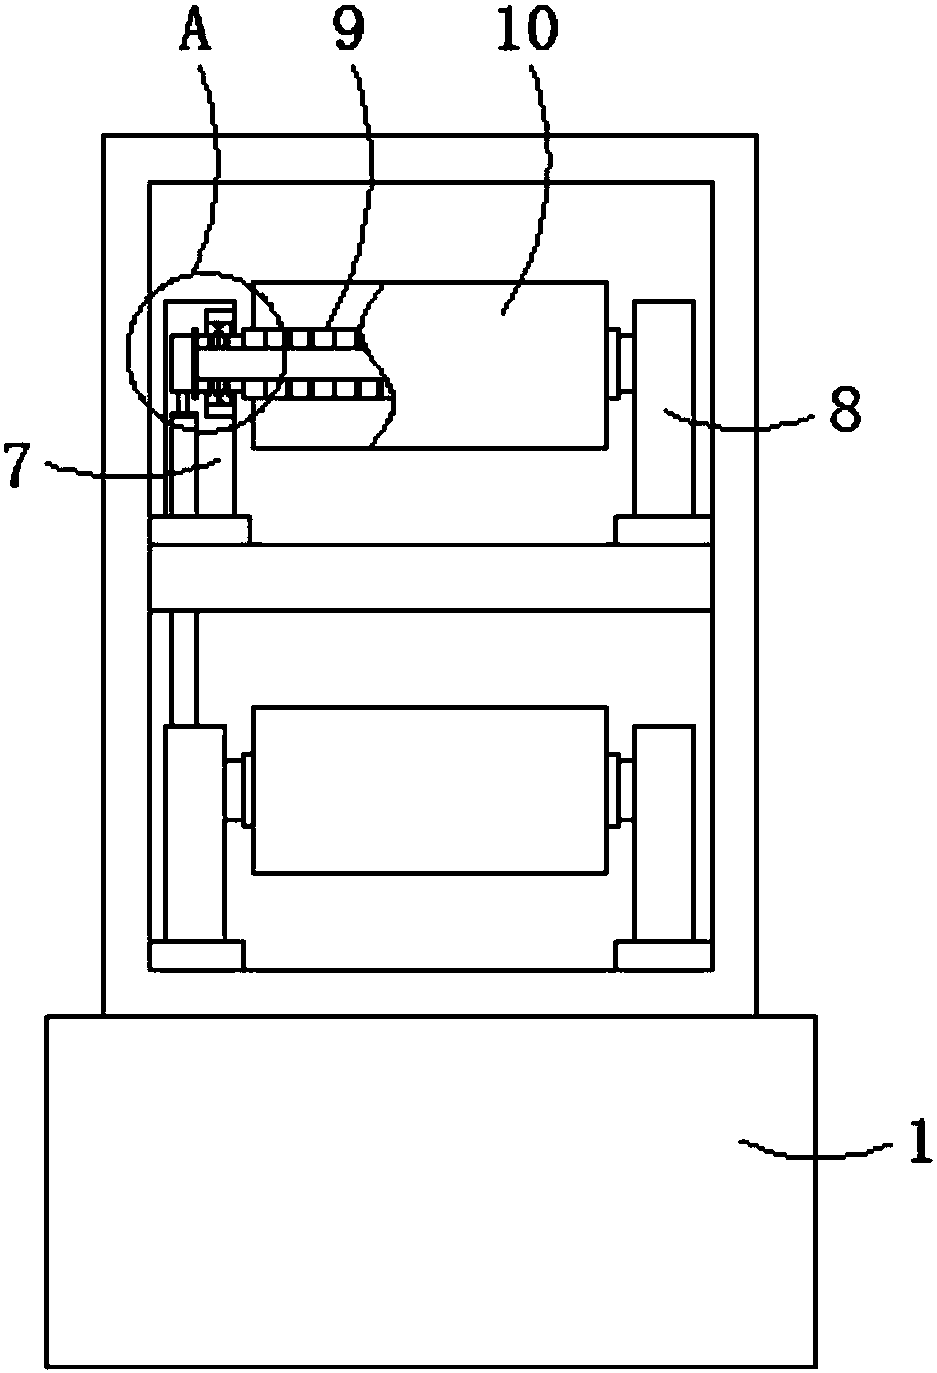 Automatic oiling device used in filament sizing machine